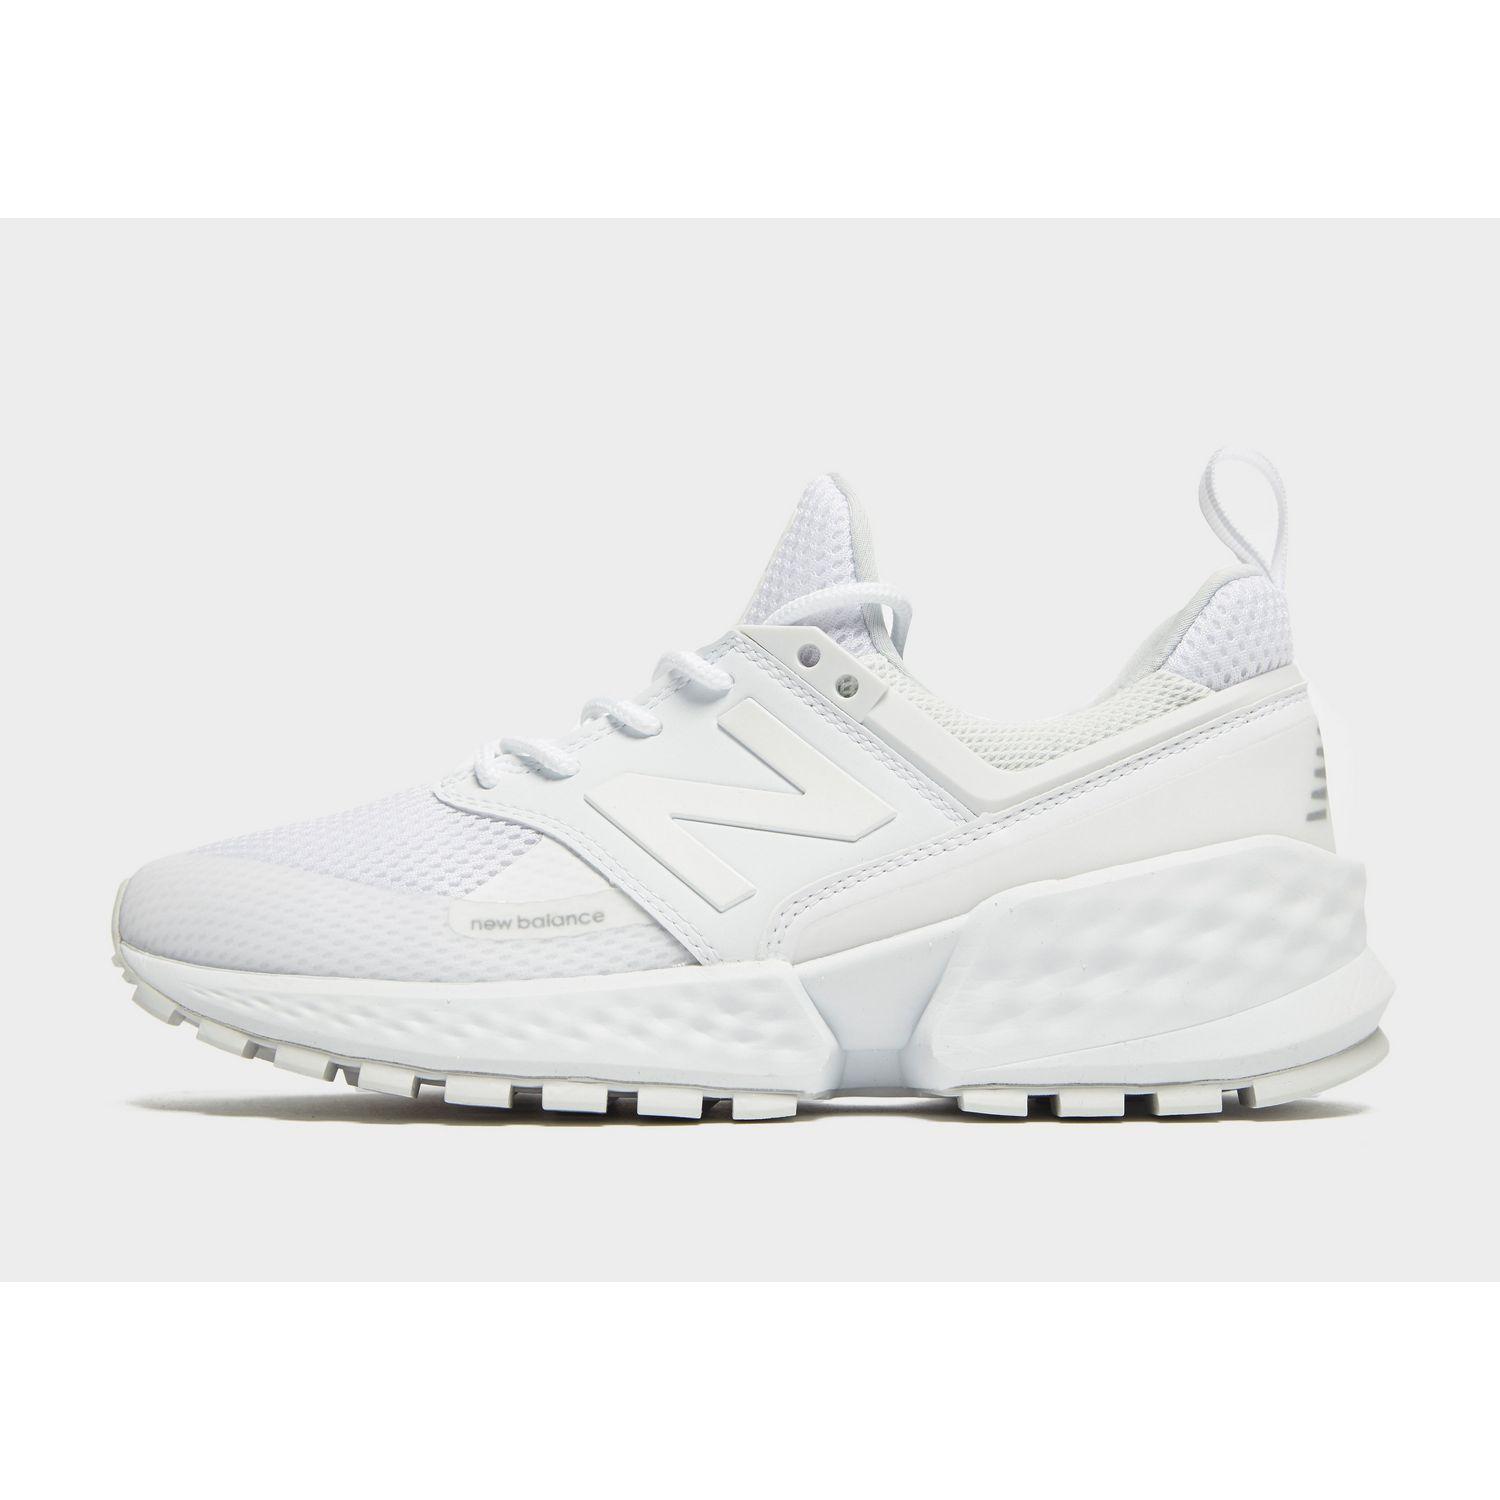 New Balance 574 Sport V2 Triple White Trainers Online Shop, UP TO ...